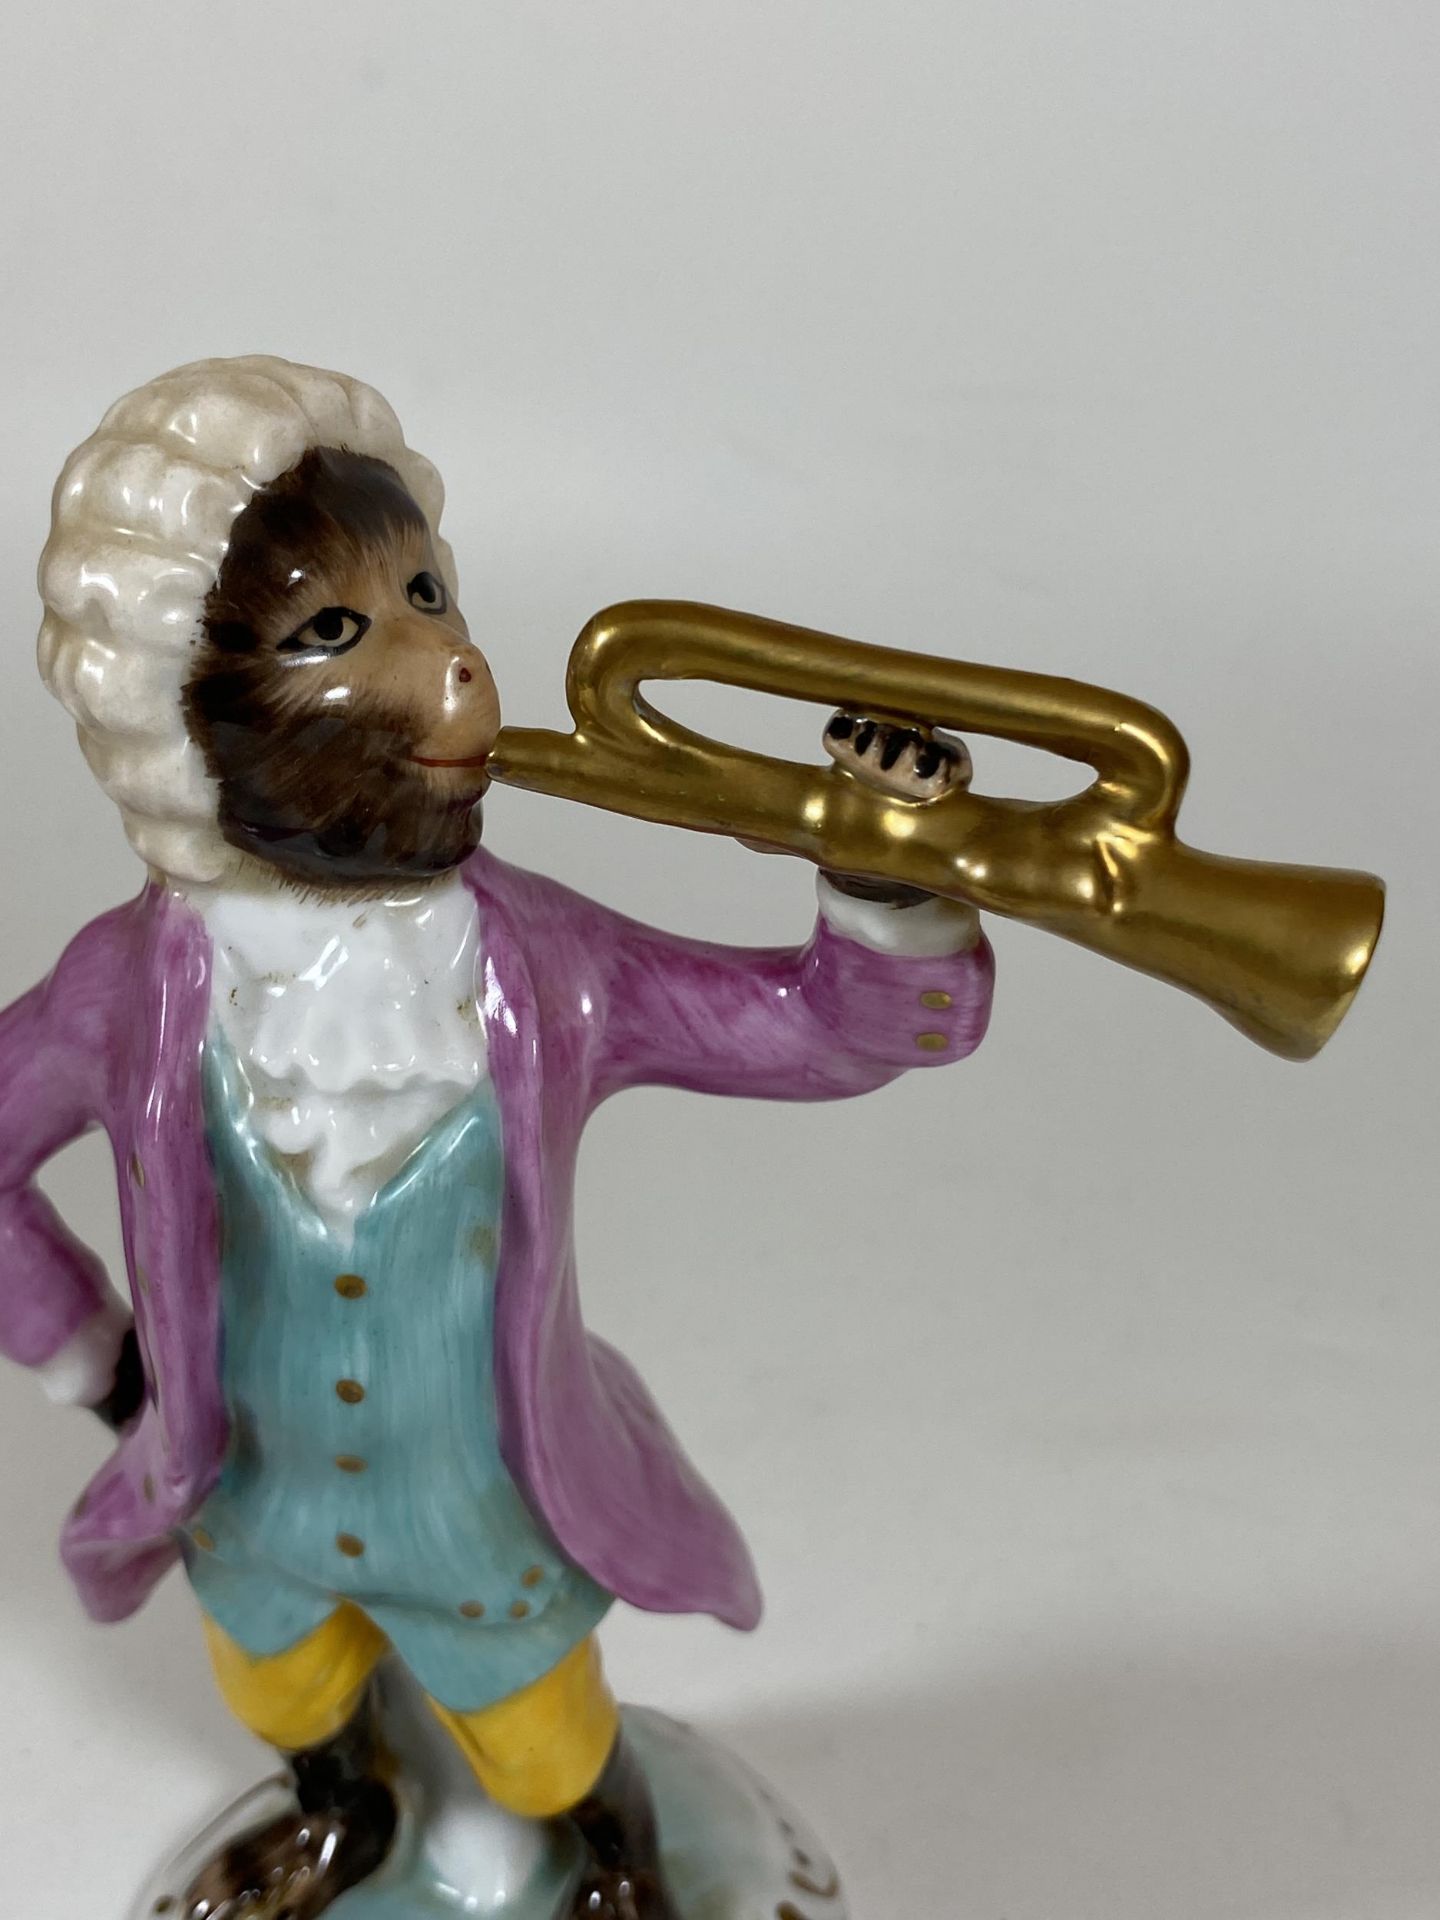 A CONTINENTAL DRESDEN STYLE PORCELAIN MONKEY TRUMPET PLAYER MUSICIAN FIGURE, HEIGHT 15.5CM - Image 2 of 5